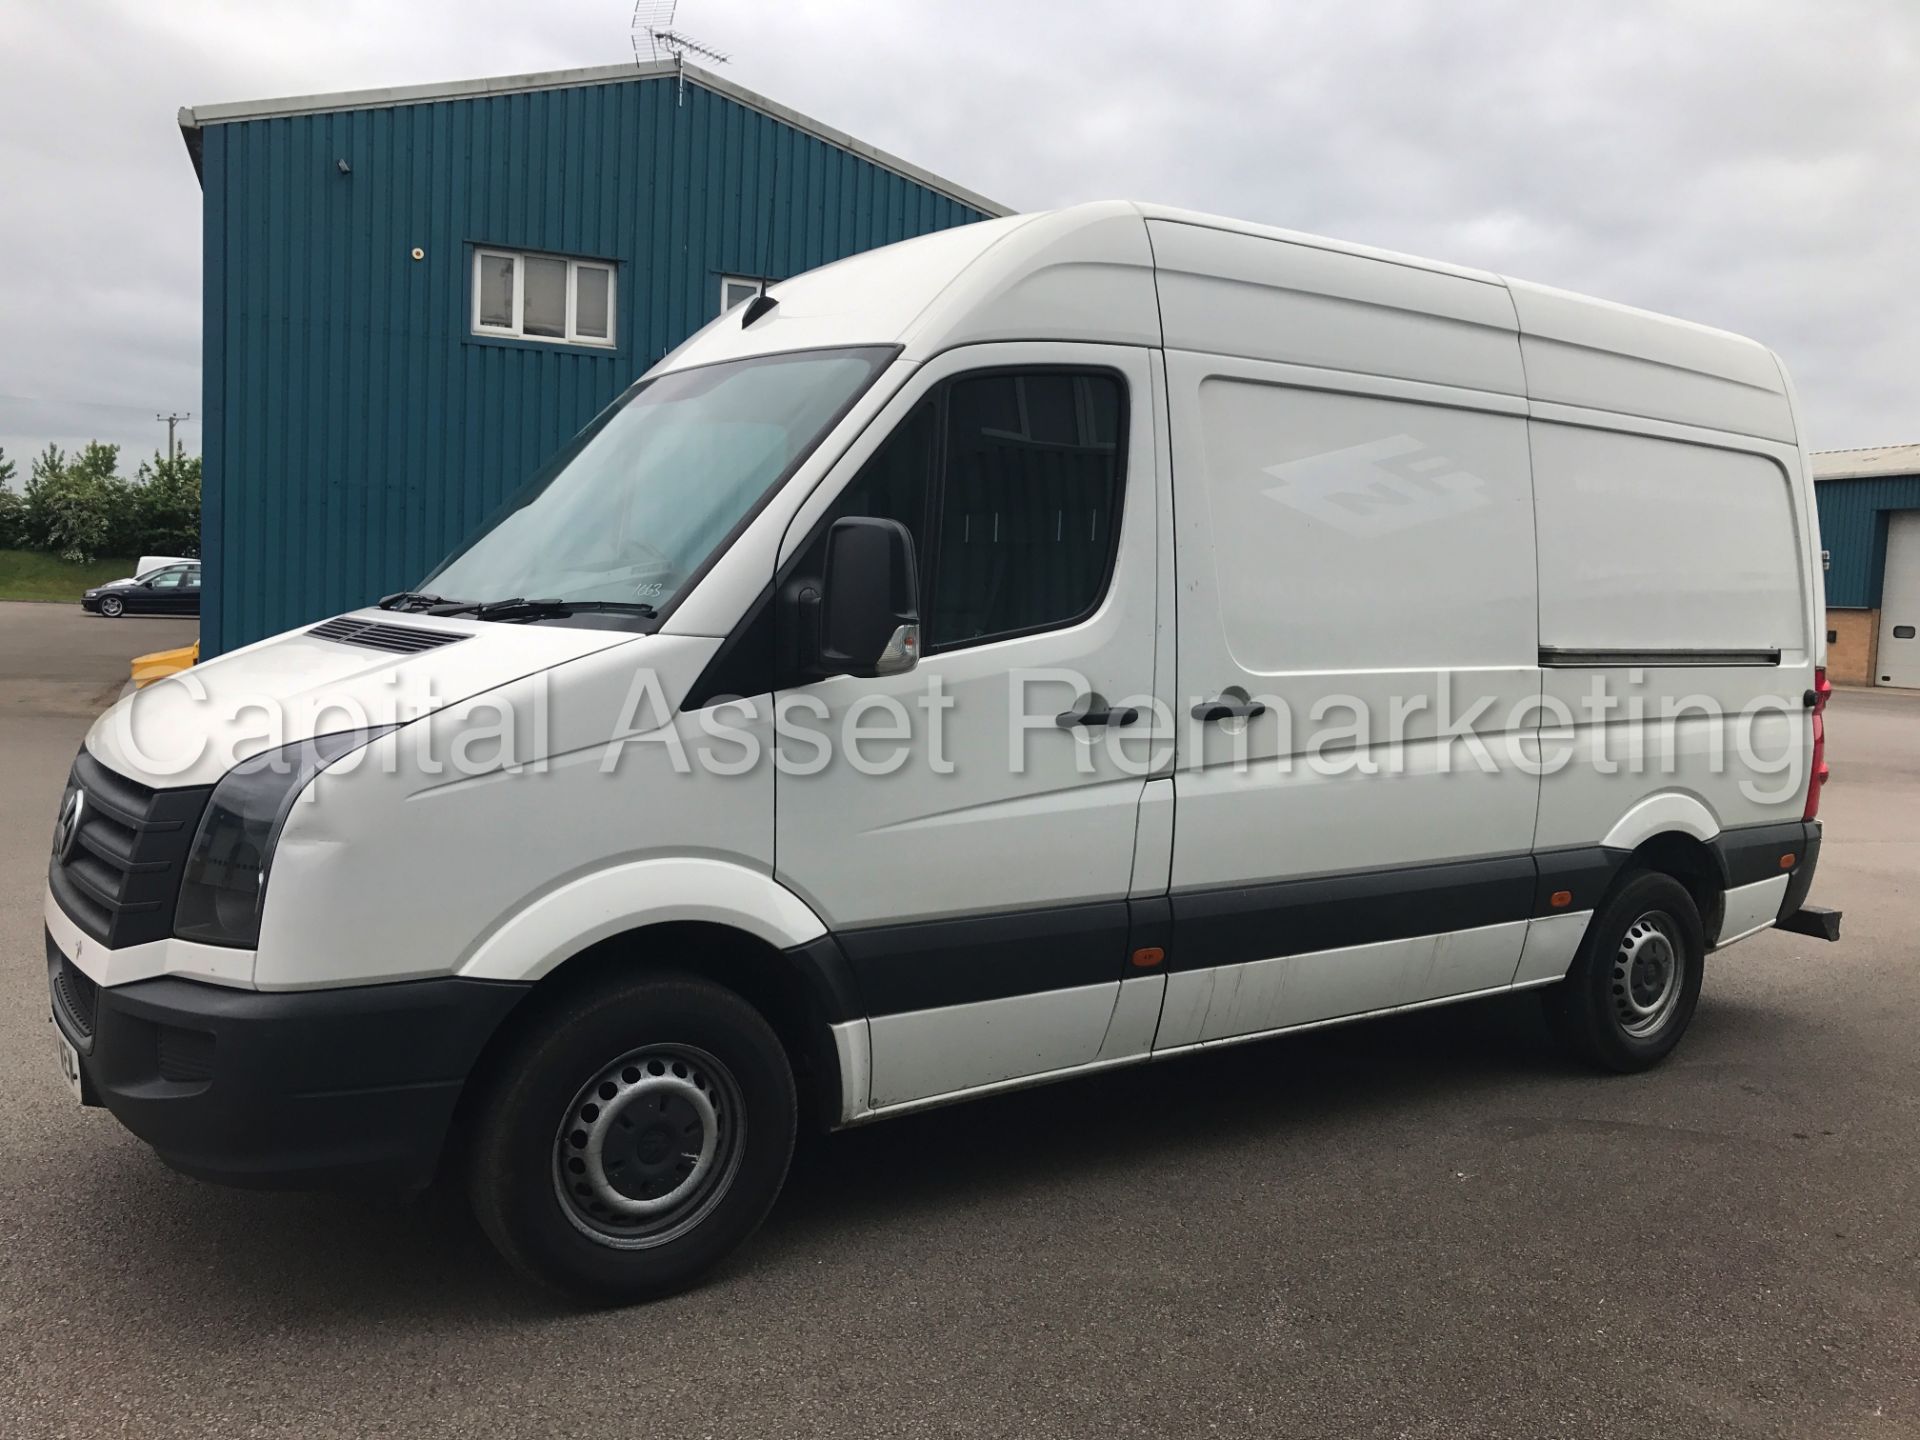 VOLKSWAGEN CRAFTER CR35 'MWB HI-ROOF' (2014) '2.0 TDI - 109 PS - 6 SPEED' *1 COMPANY OWNER FROM NEW* - Image 6 of 19